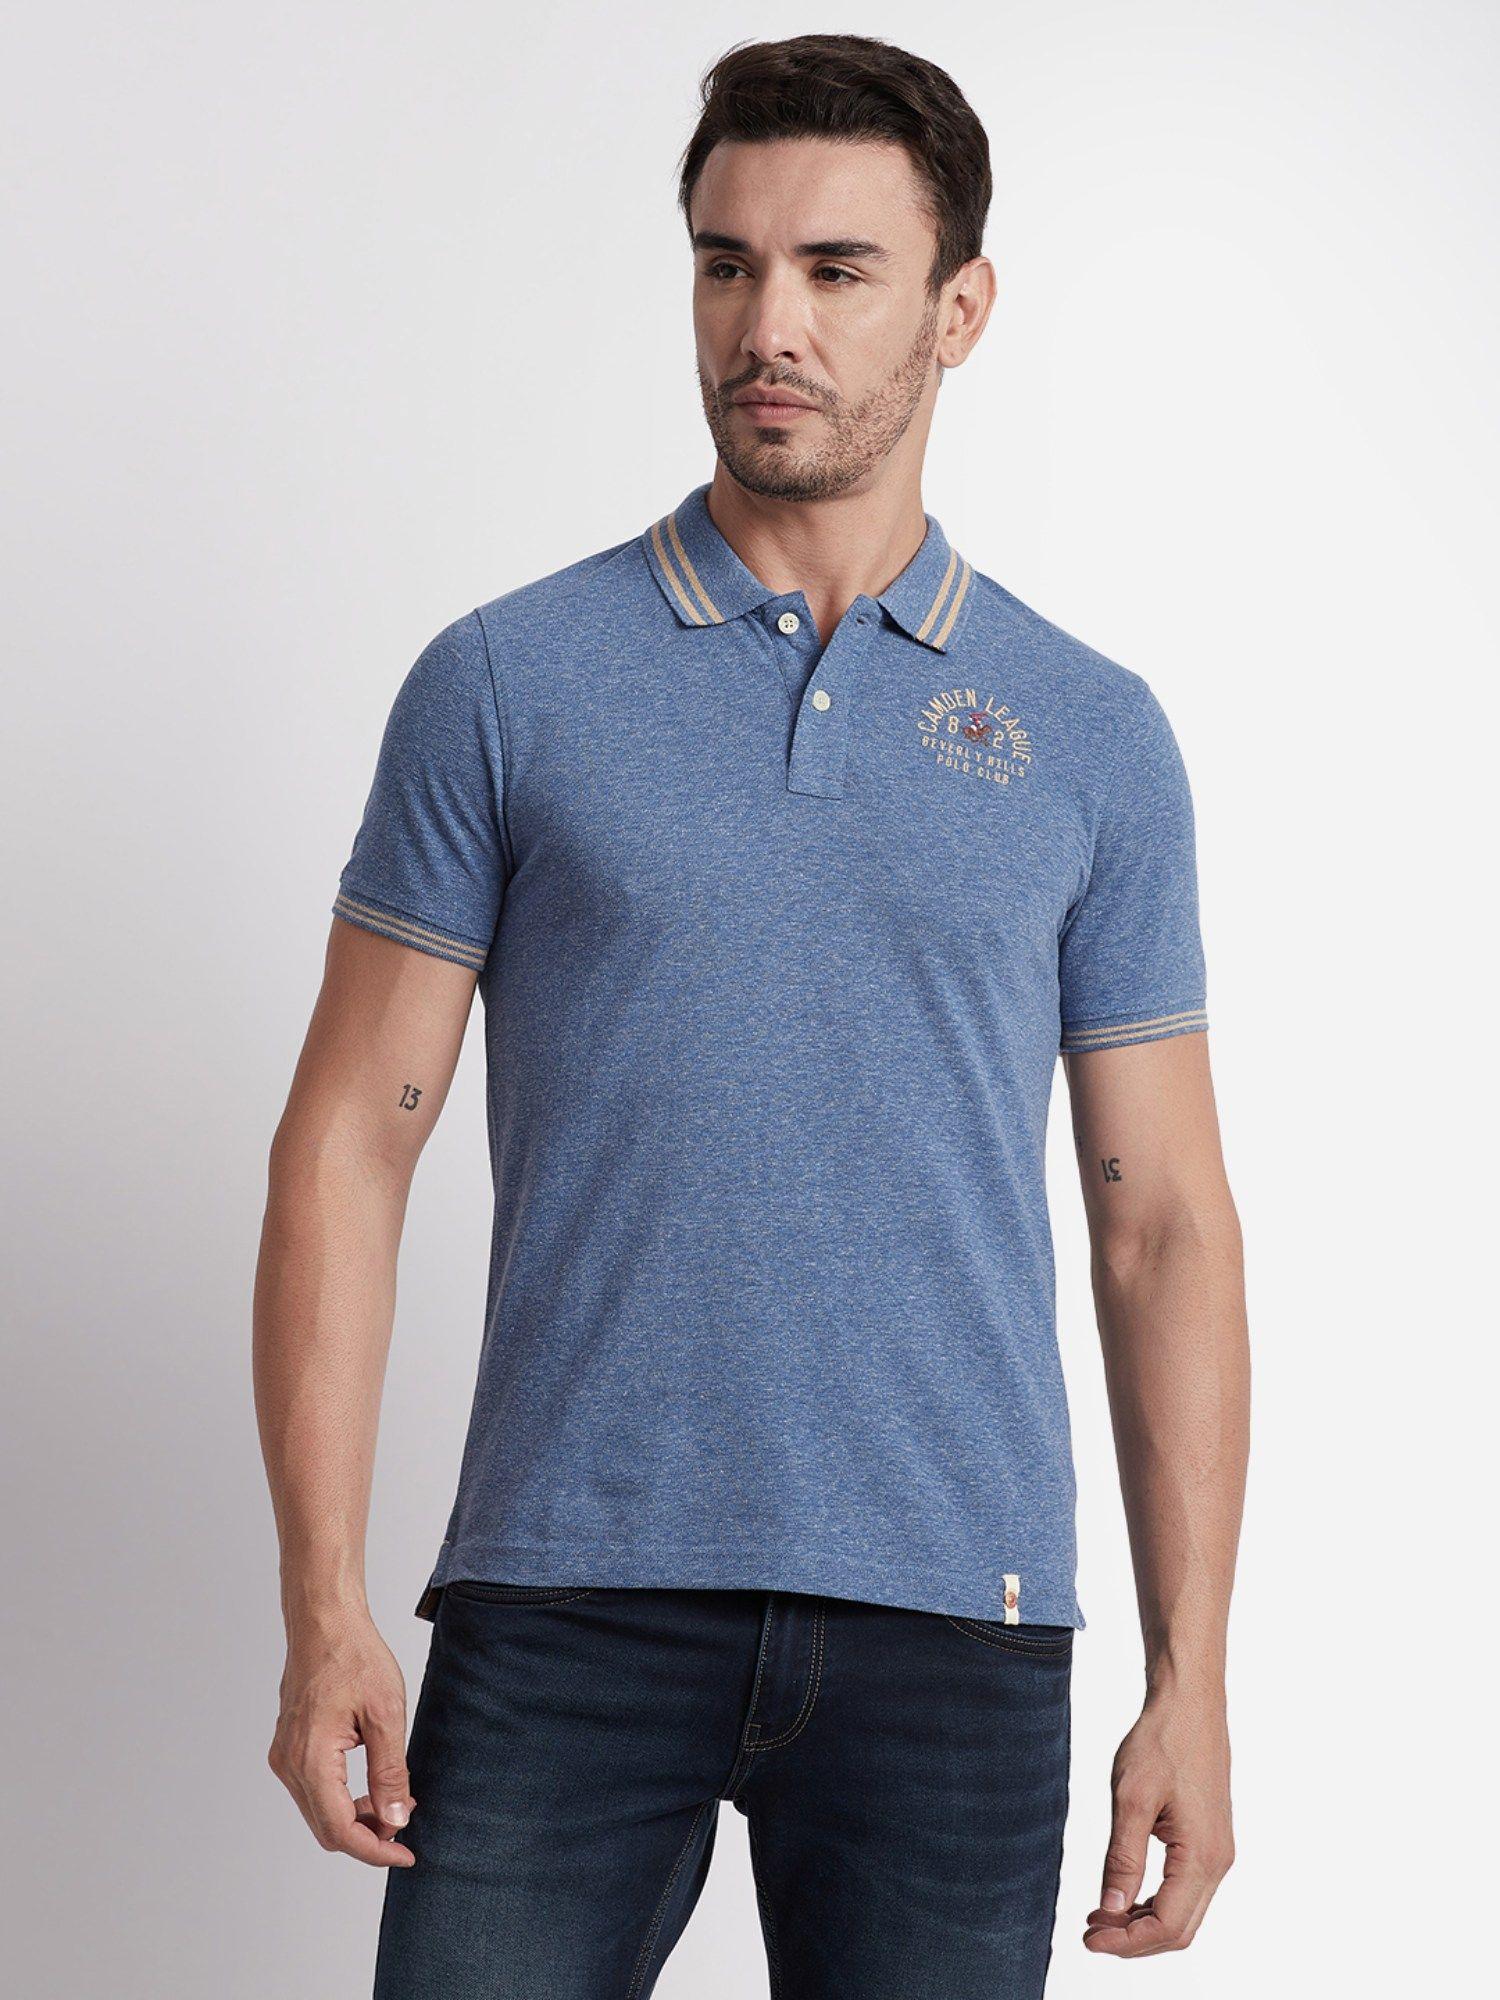 speckled knit blue polo t-shirt